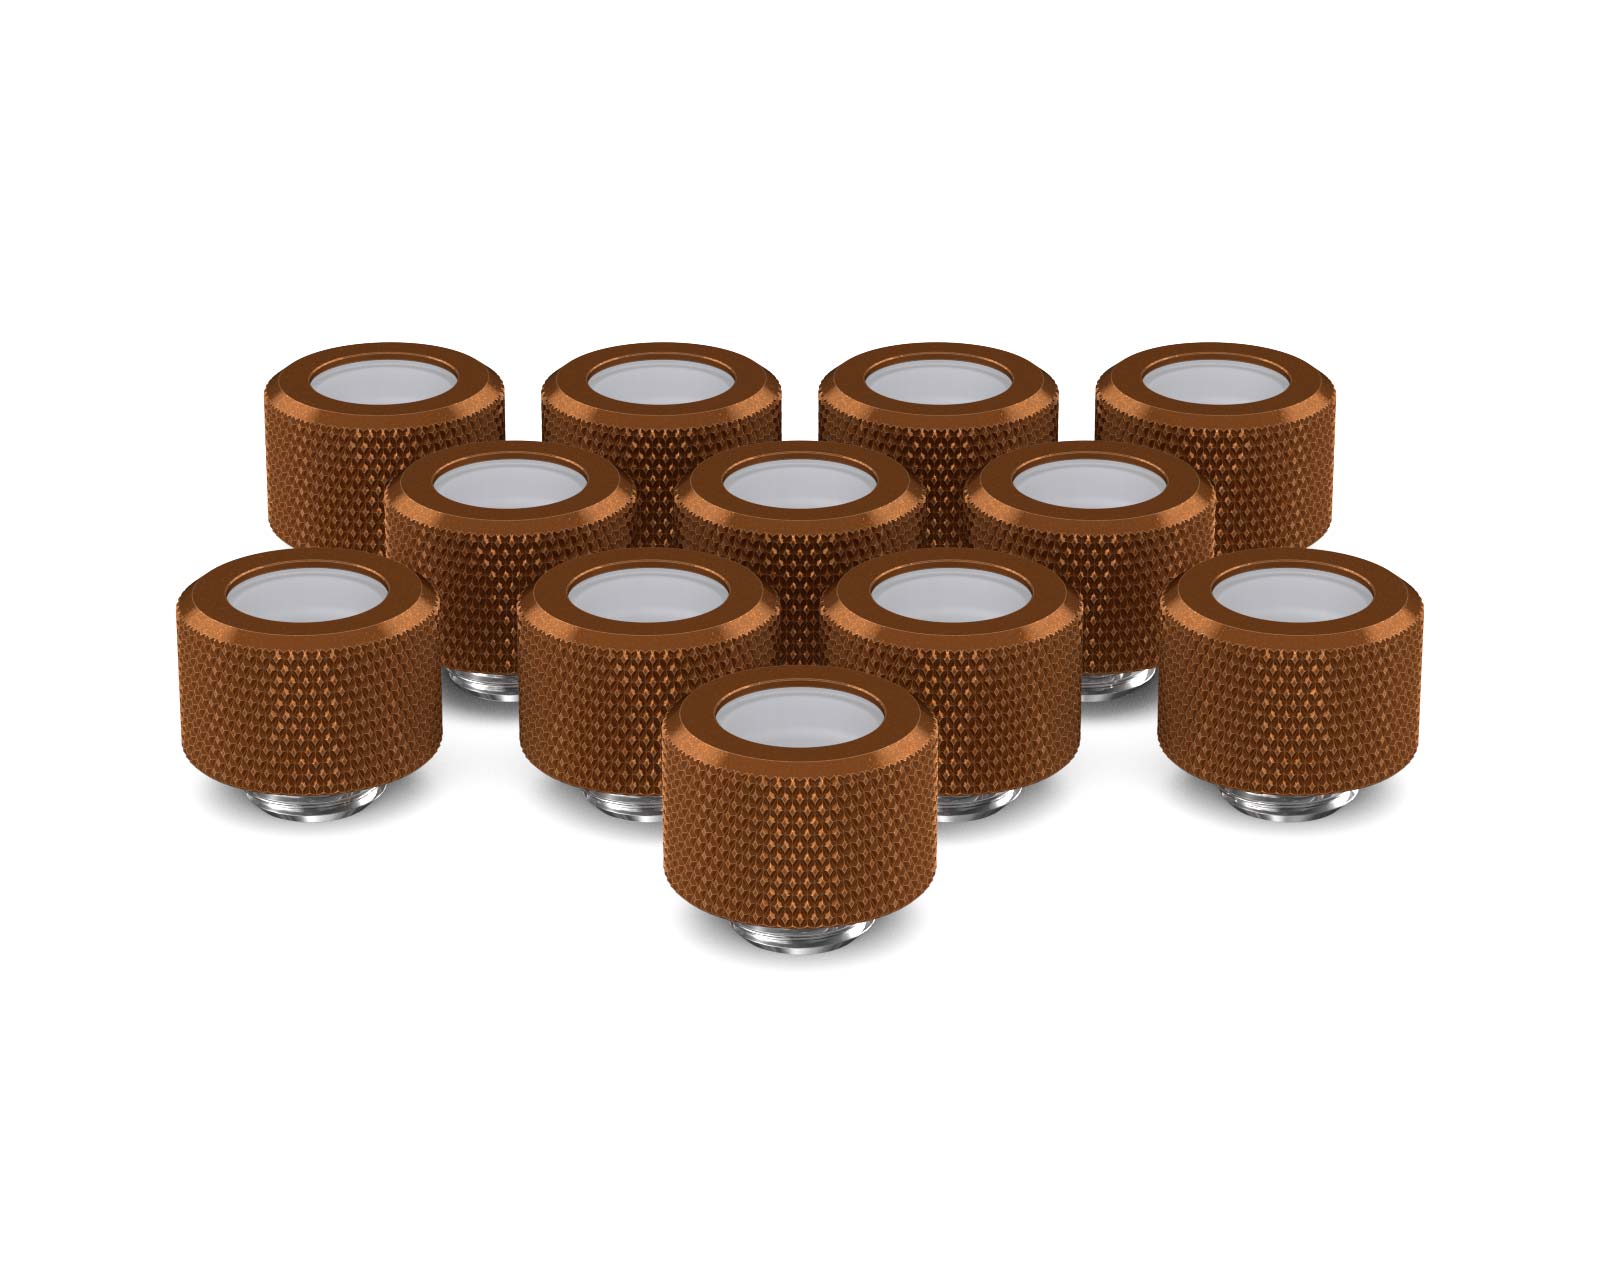 PrimoChill 14mm OD Rigid SX Fitting - 12 Pack - PrimoChill - KEEPING IT COOL Copper